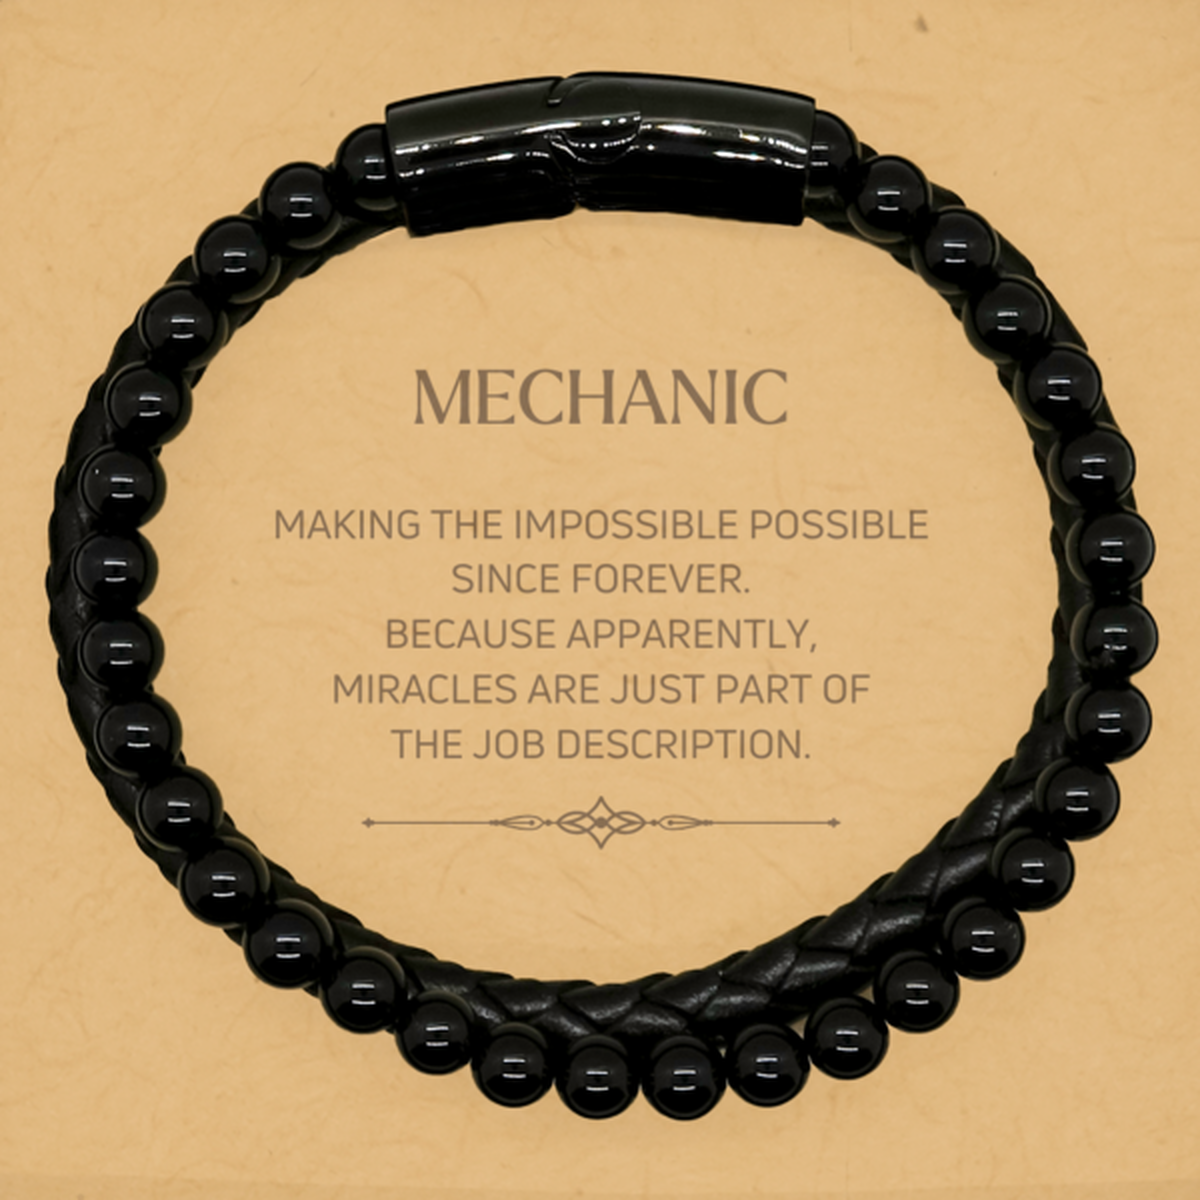 Funny Mechanic Gifts, Miracles are just part of the job description, Inspirational Birthday Stone Leather Bracelets For Mechanic, Men, Women, Coworkers, Friends, Boss